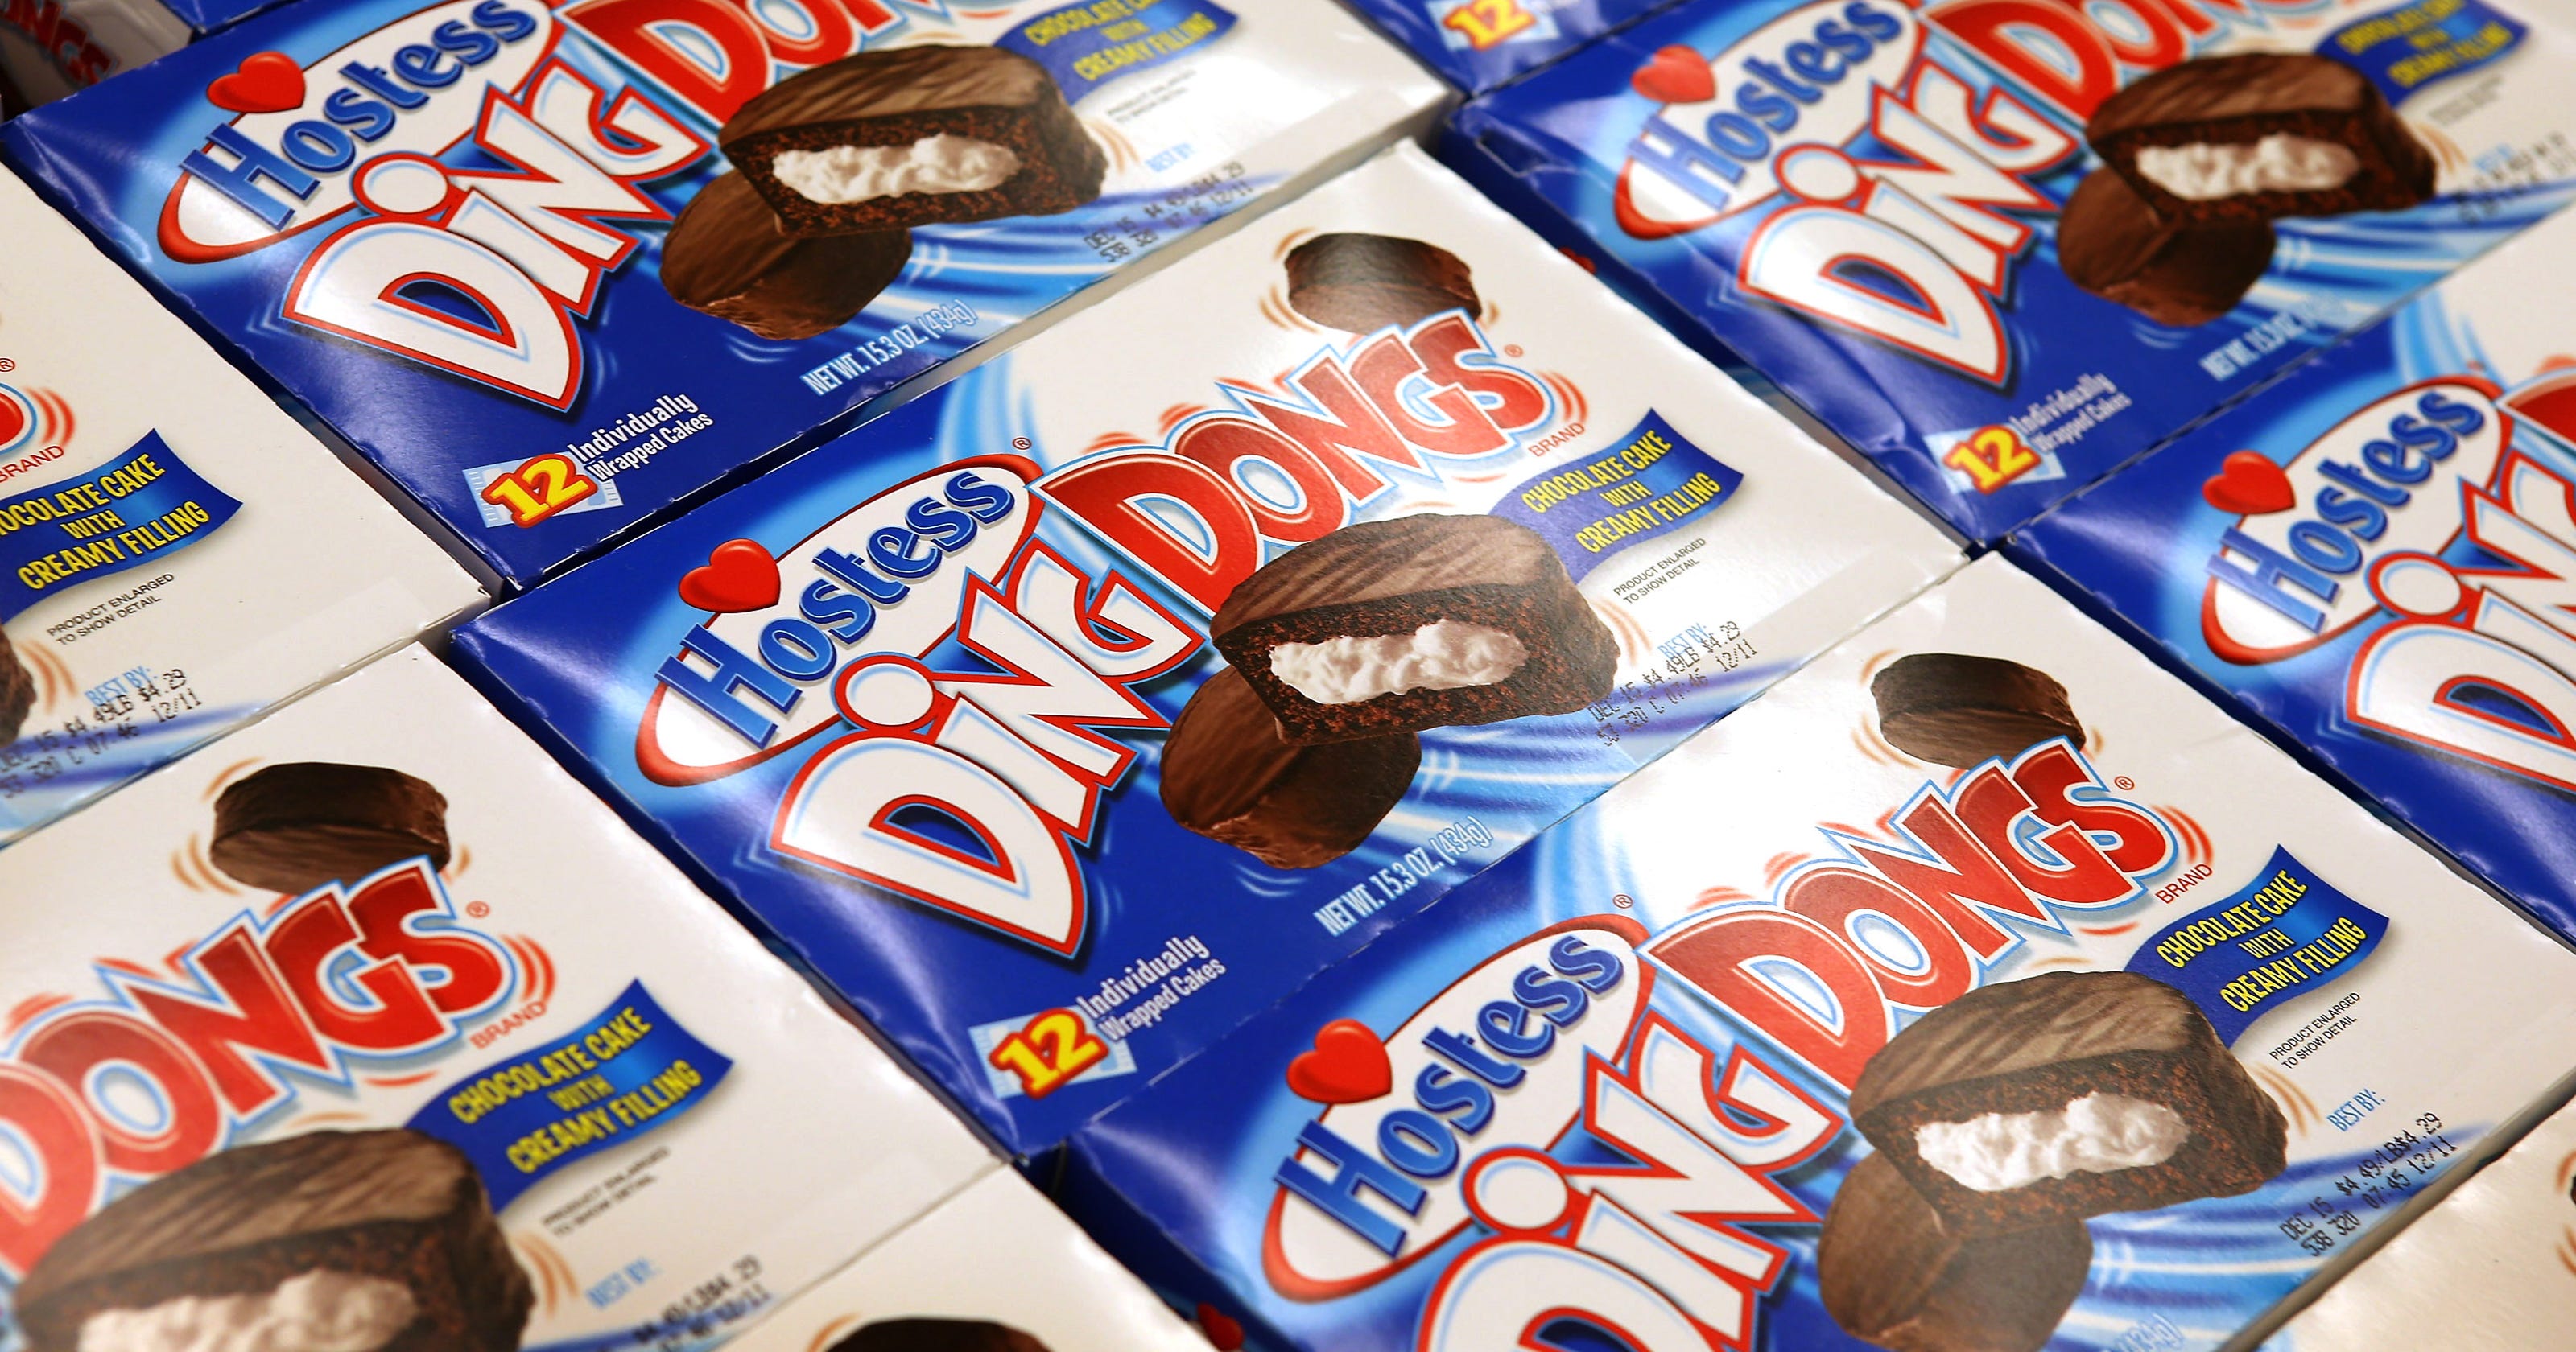 Ding Dong Shortage Hostess Orders Recall Due To Flour